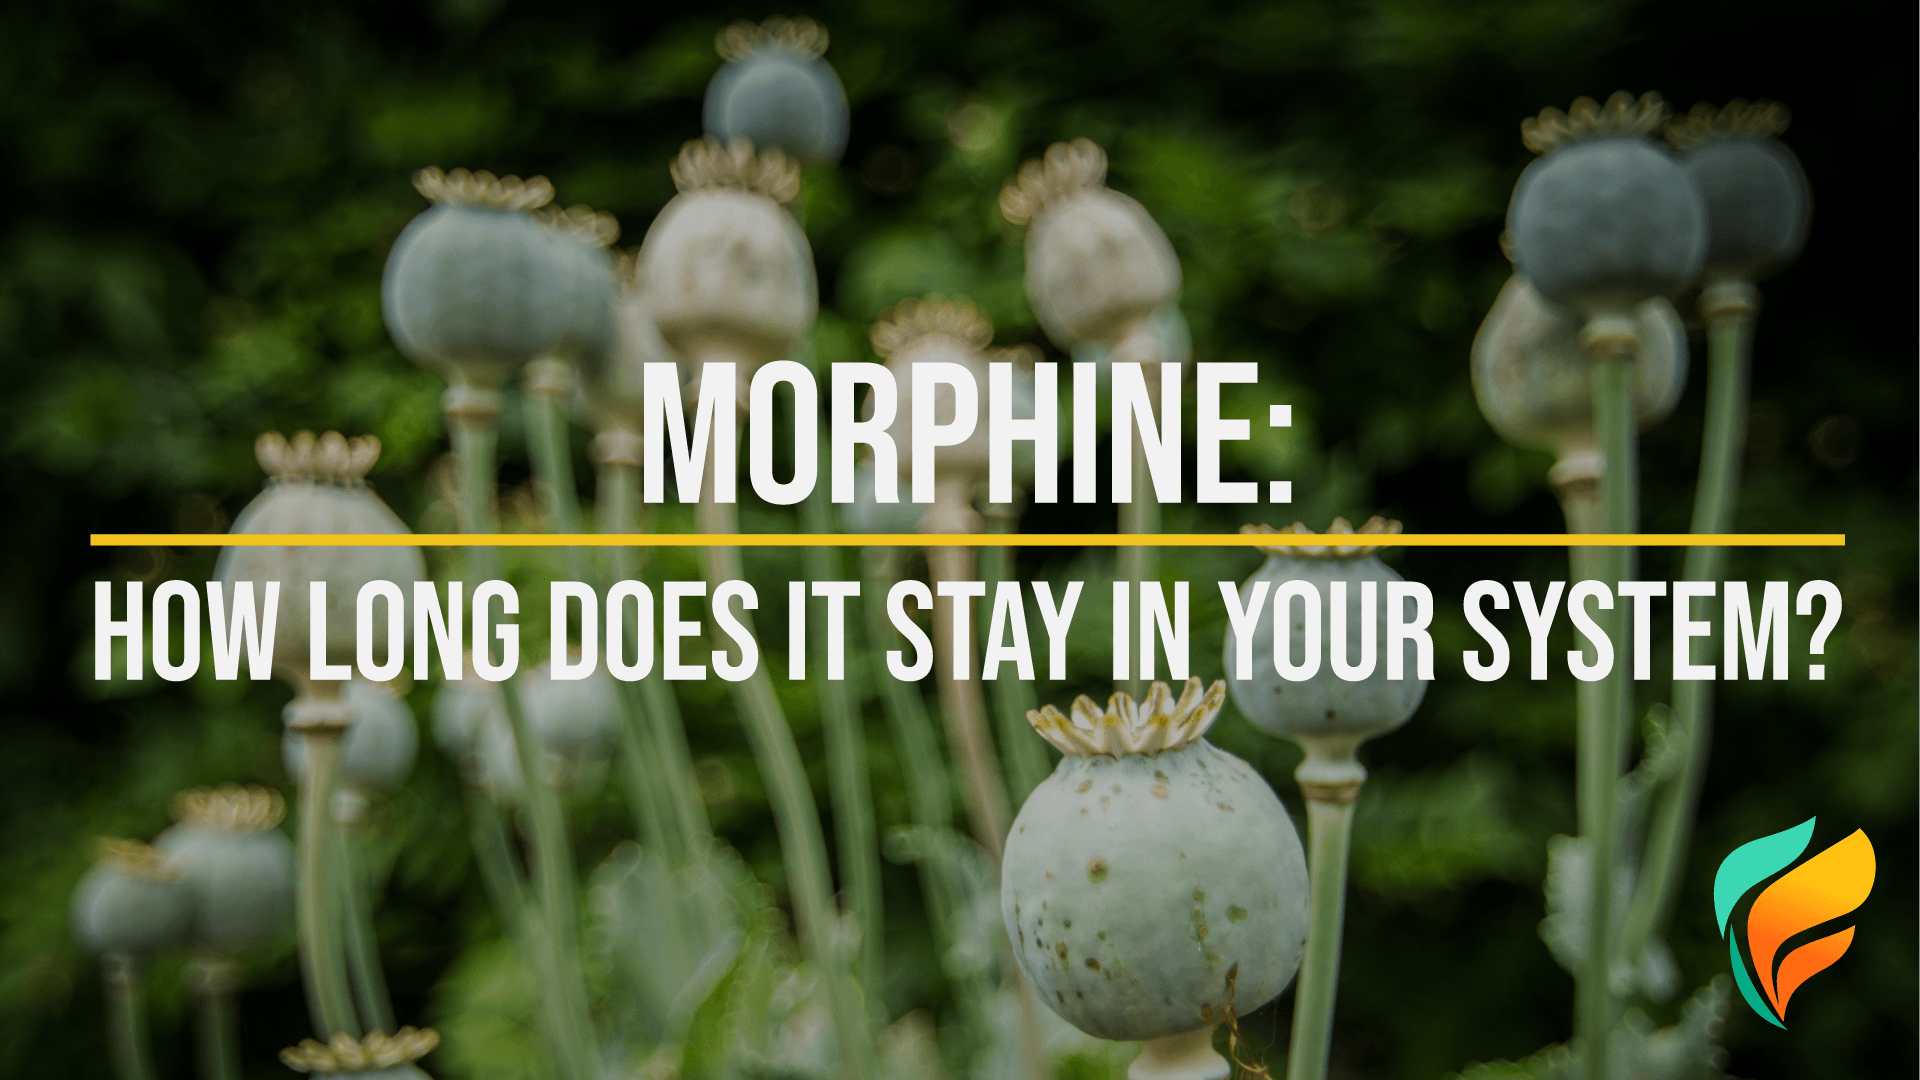 Facts About Morphine, Drug Tests, & More